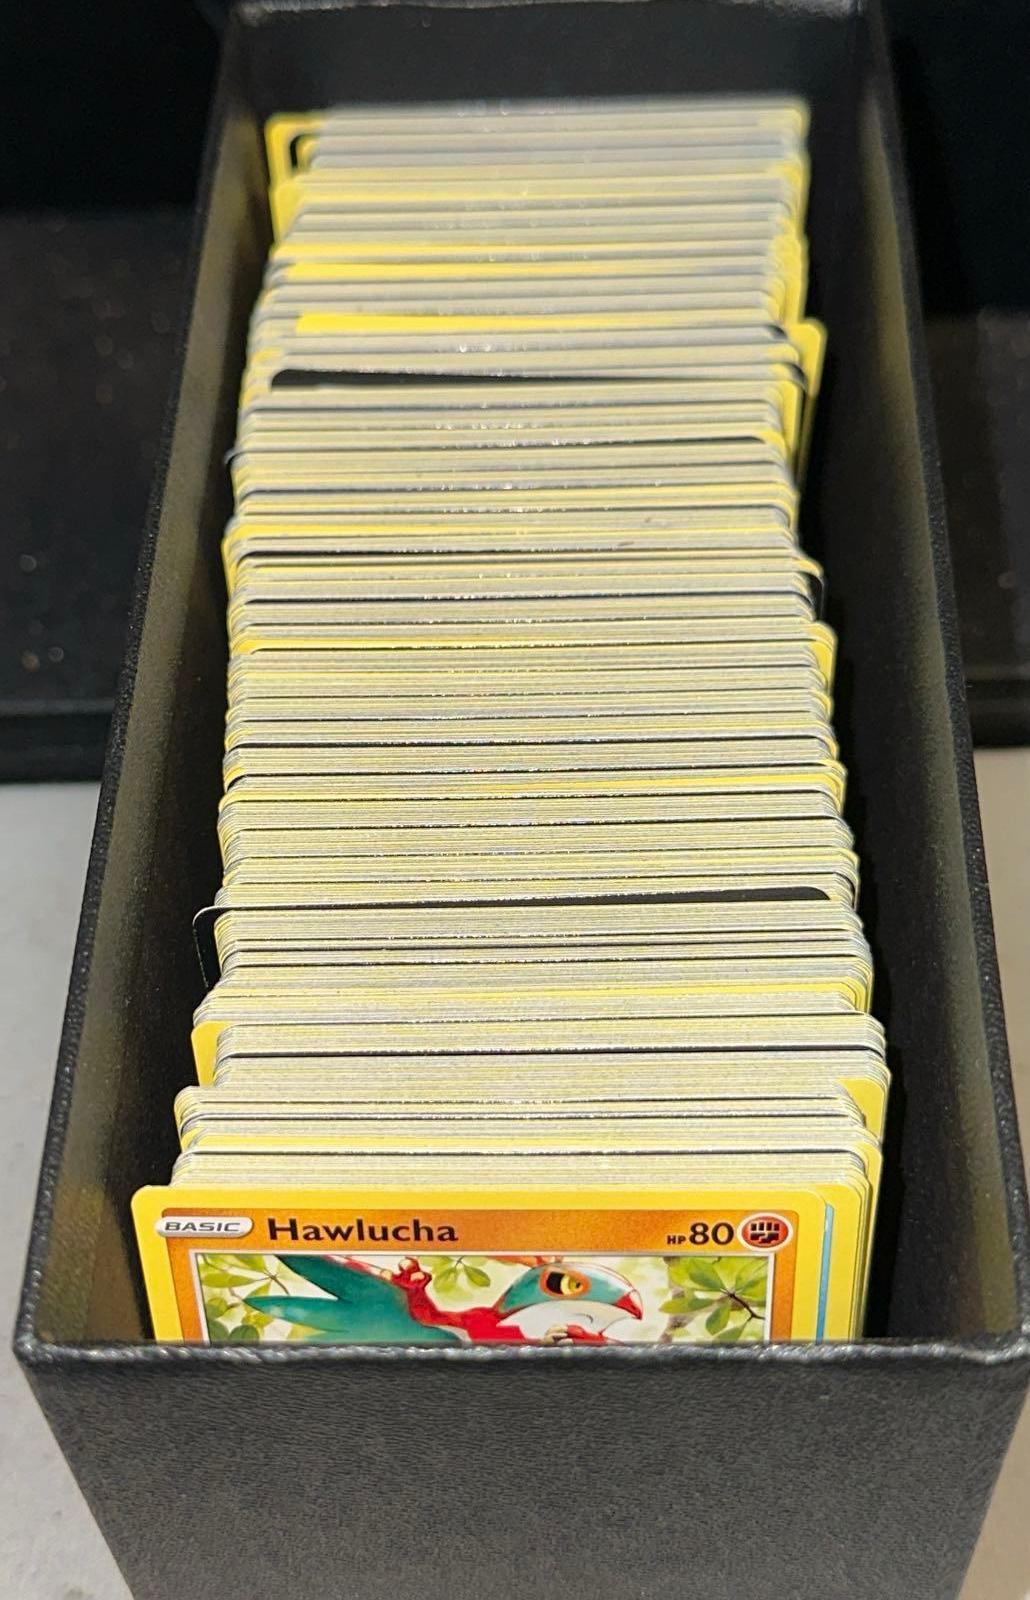 Box of Unsearched Pokemon Cards